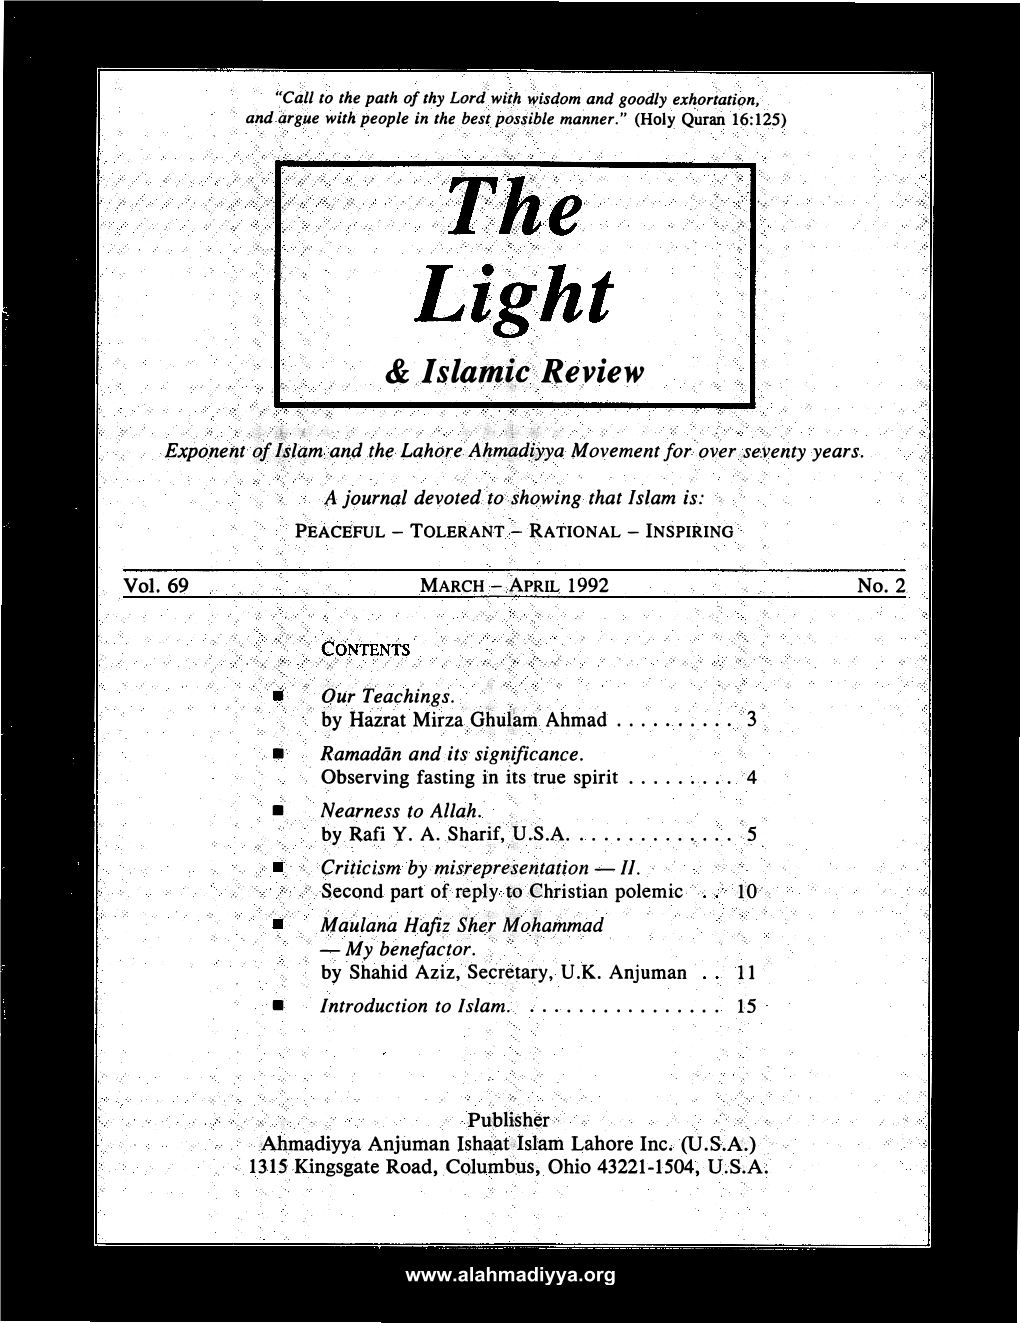 The Light & Islamic Review